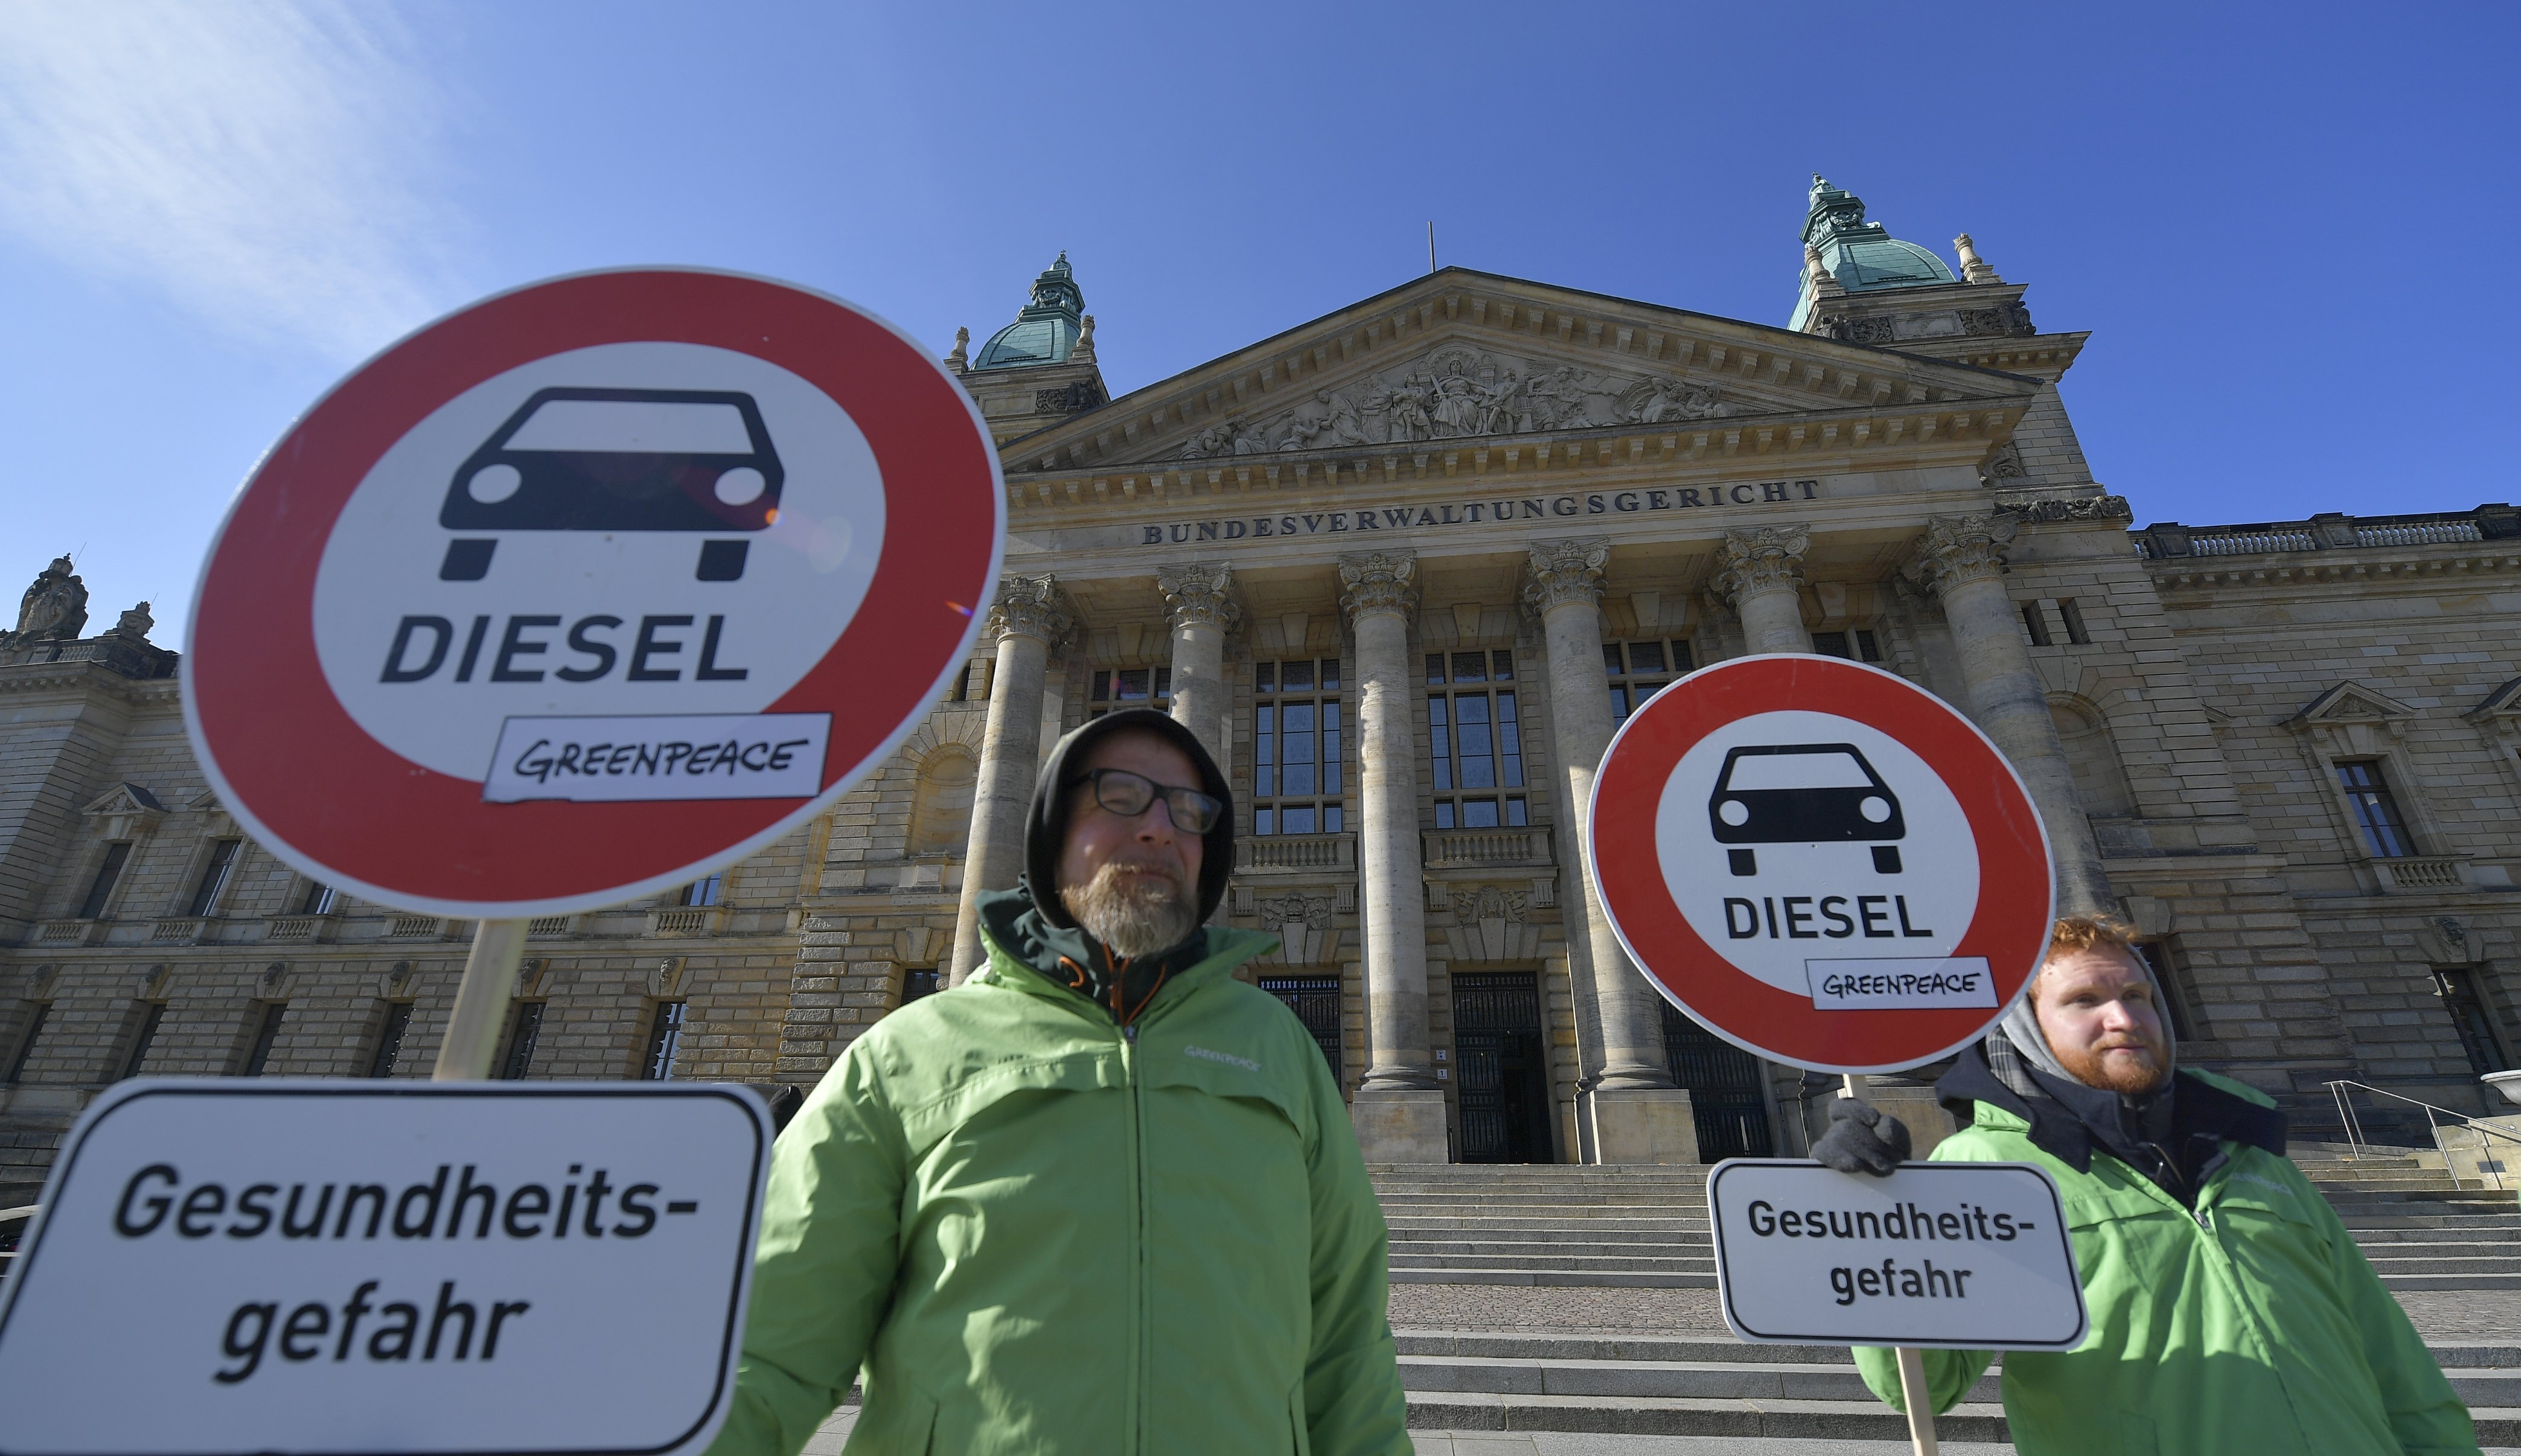 2018-02-27 12:00:24 epa06568203 Environmentalists with posters stand in front of the court building at the start of a hearing at the Federal Administrative Court prior to the judges' decision on banning Diesel engine powered vehicles from German cities when air pollution exceeds the permissible limits, in Leipzig, Germany, 27 February 2018. The court ruled that banning Diesel engine powered vehicles from innercity traffic in general is permissible but asked the cities to review their air quality requirements for proportionality. In 2017, some 70 German cities exceeded the EU limit for nitrogen oxide, which has been in force since 2010. Placard reads: 'Diesel Danger to the Health' EPA/MATTHIAS RIETSCHEL